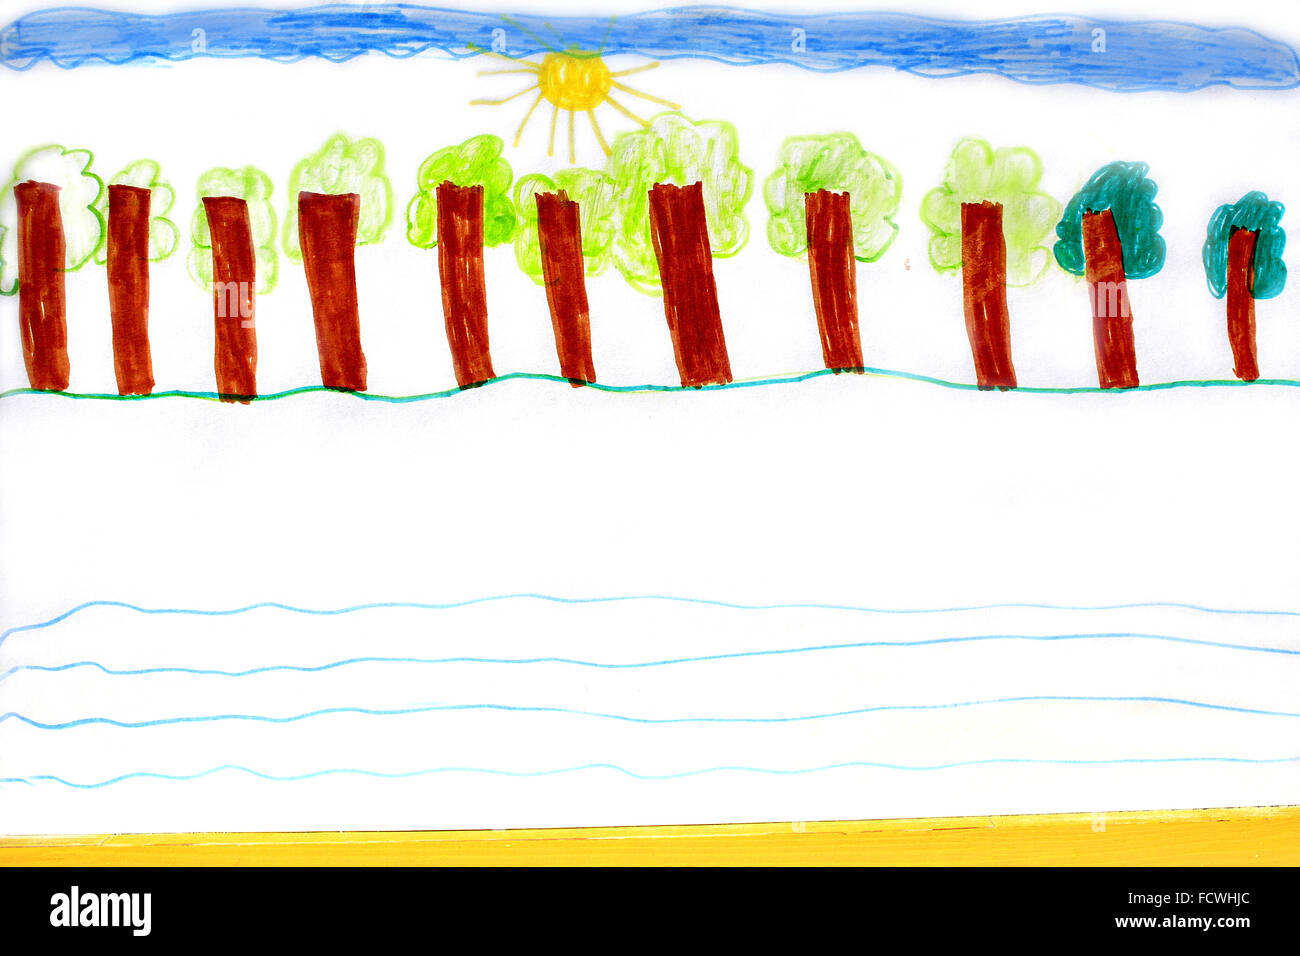 https://c8.alamy.com/comp/FCWHJC/joy-childish-drawing-with-trees-standing-in-row-on-the-hill-FCWHJC.jpg